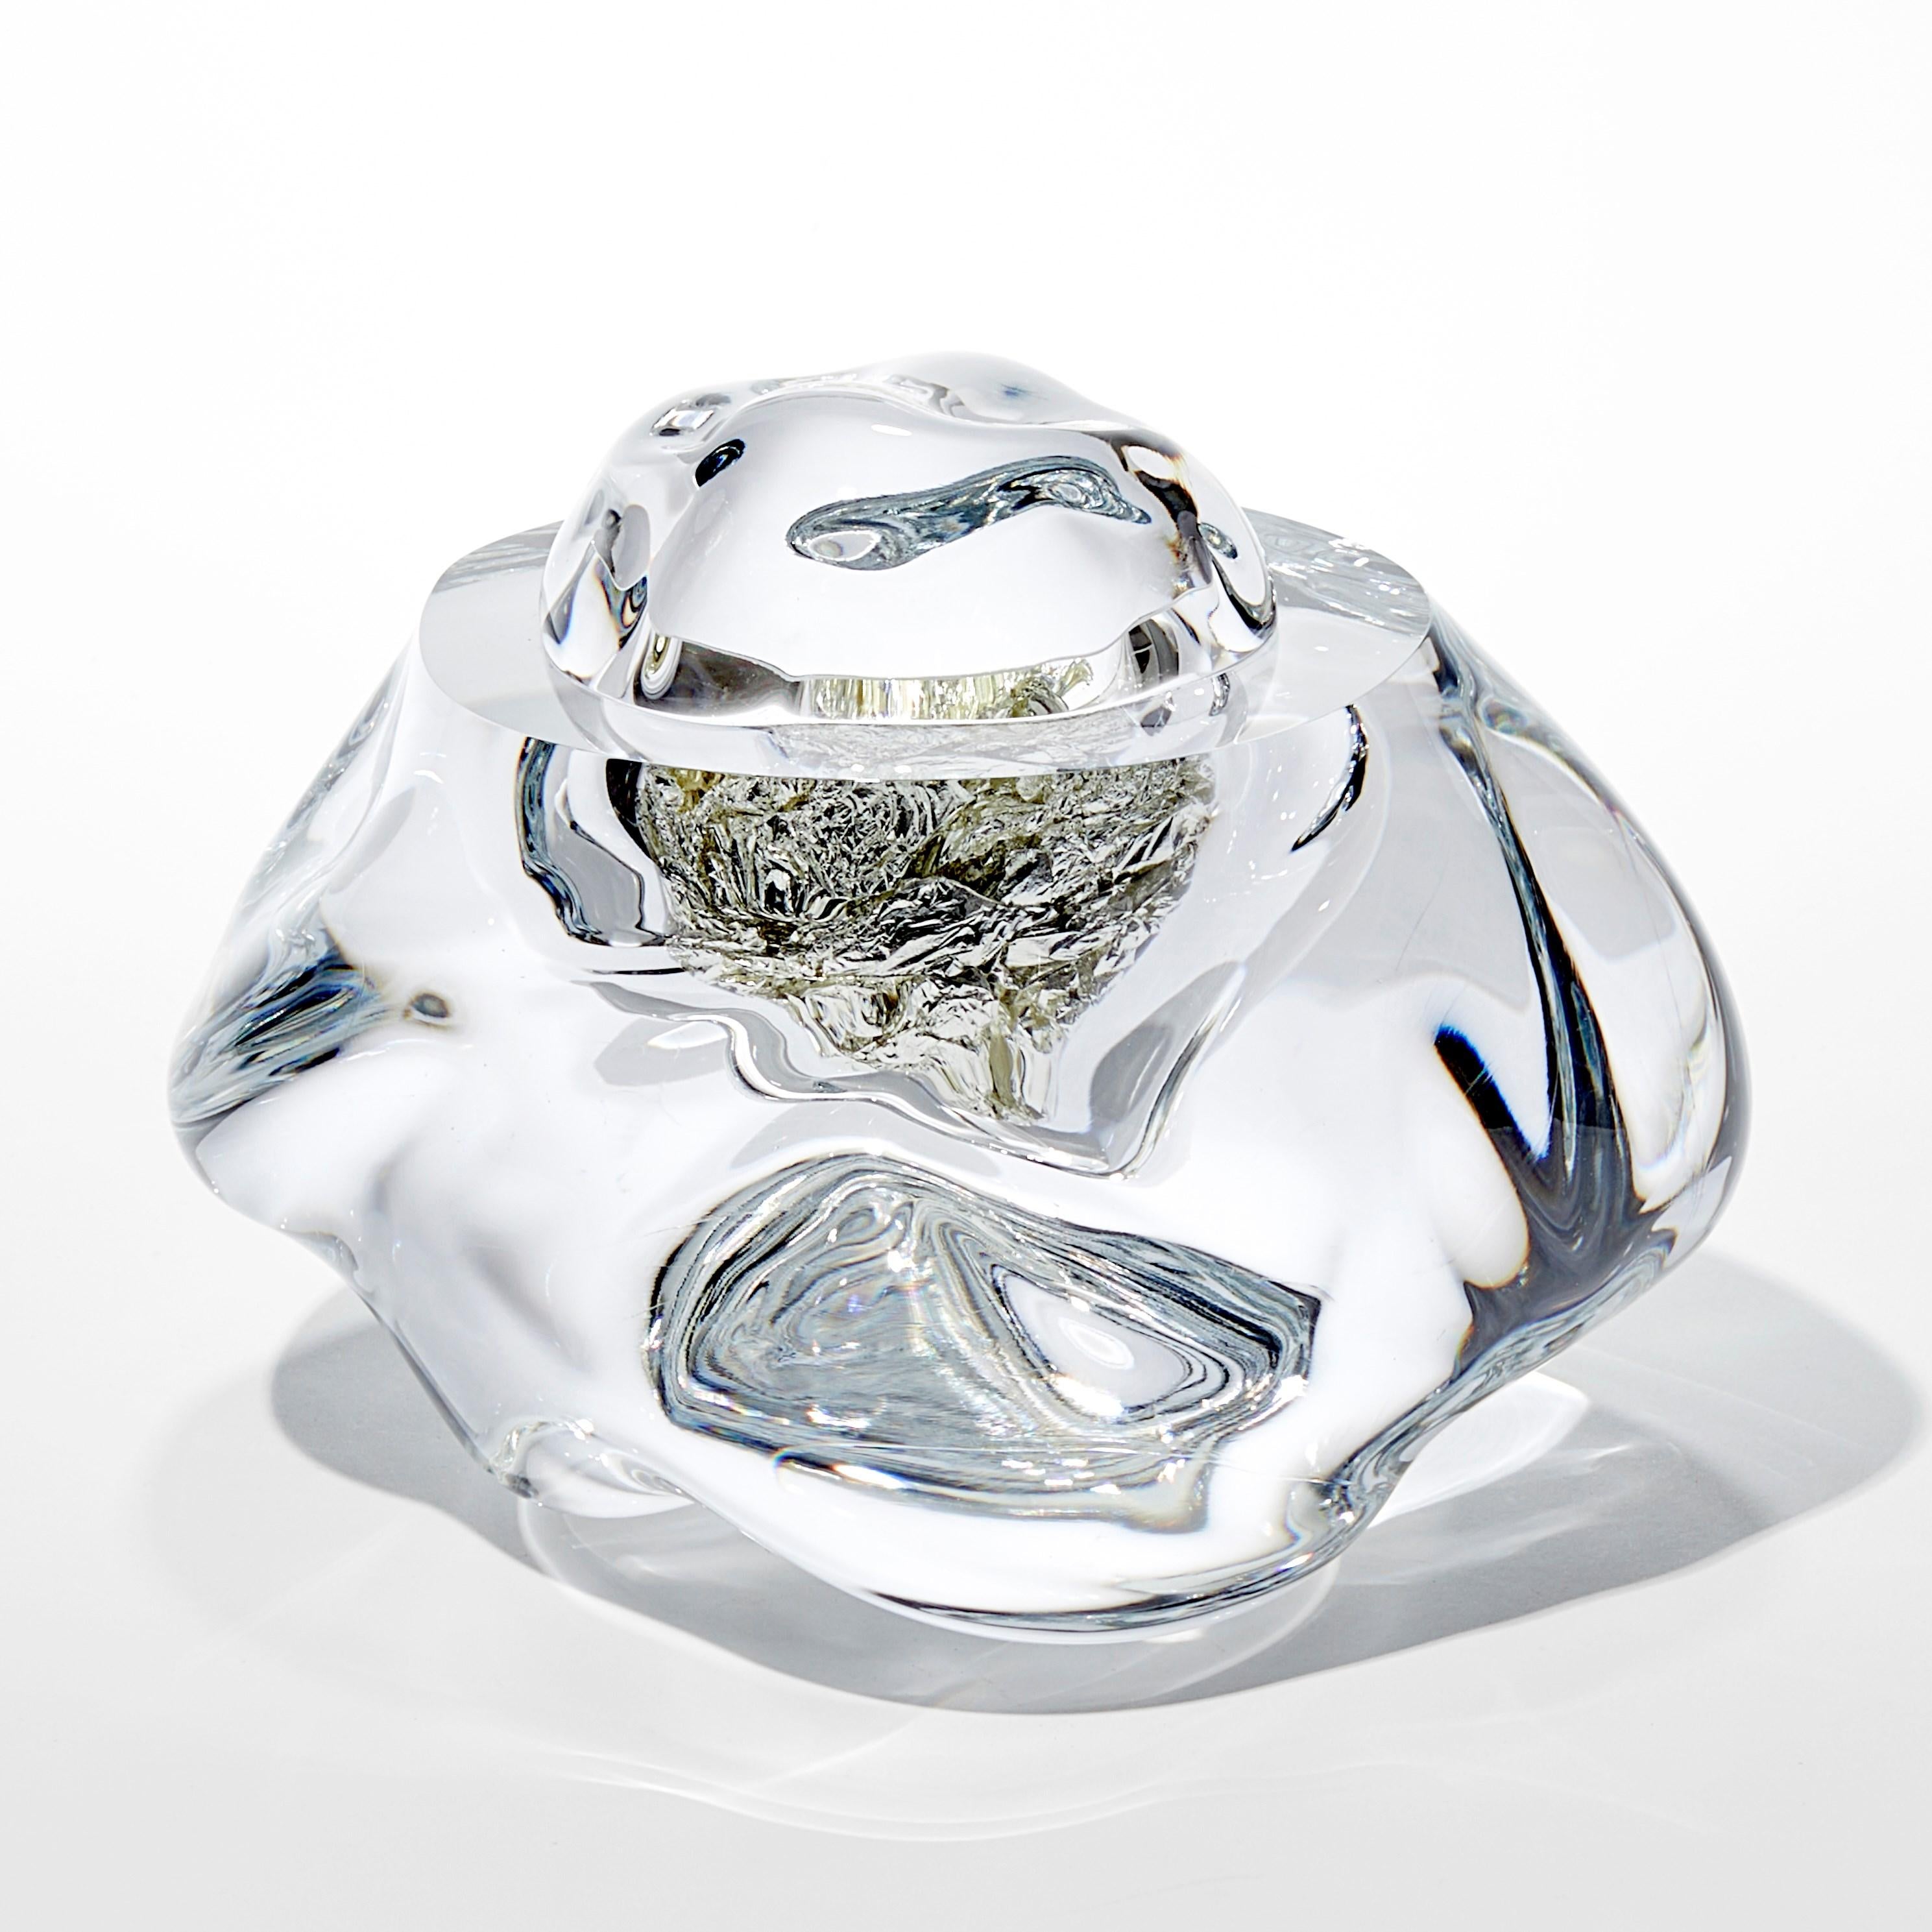 'Erratic K with 12ct White Gold' is a handblown and cut glass sculpture created by the British artist, Anthony Scala.

The geological term 'erratic' refers to a stone or boulder that differs to its surrounding rock, that is believed to have been